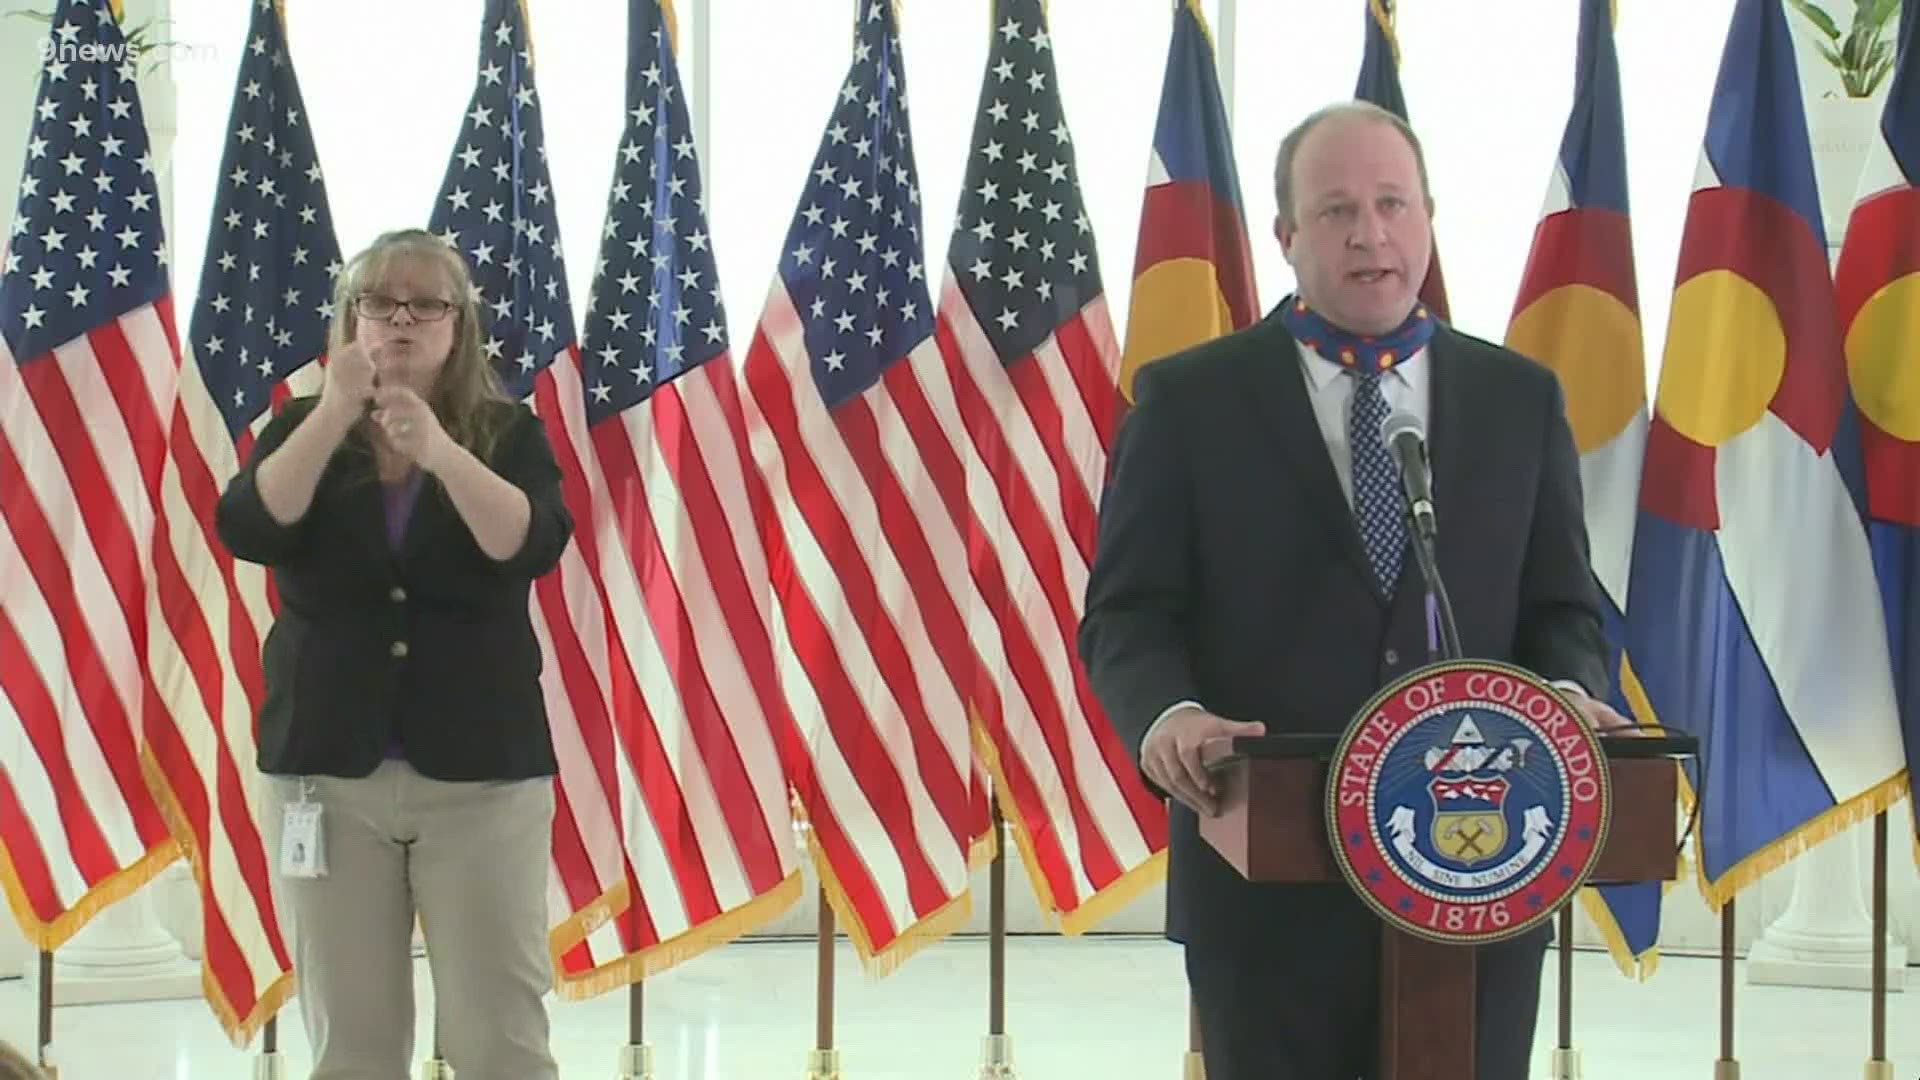 Polis said the state will be closely analyzing data over the next five days to determine whether COVID-19 cases in Colorado have begun to trend downward.